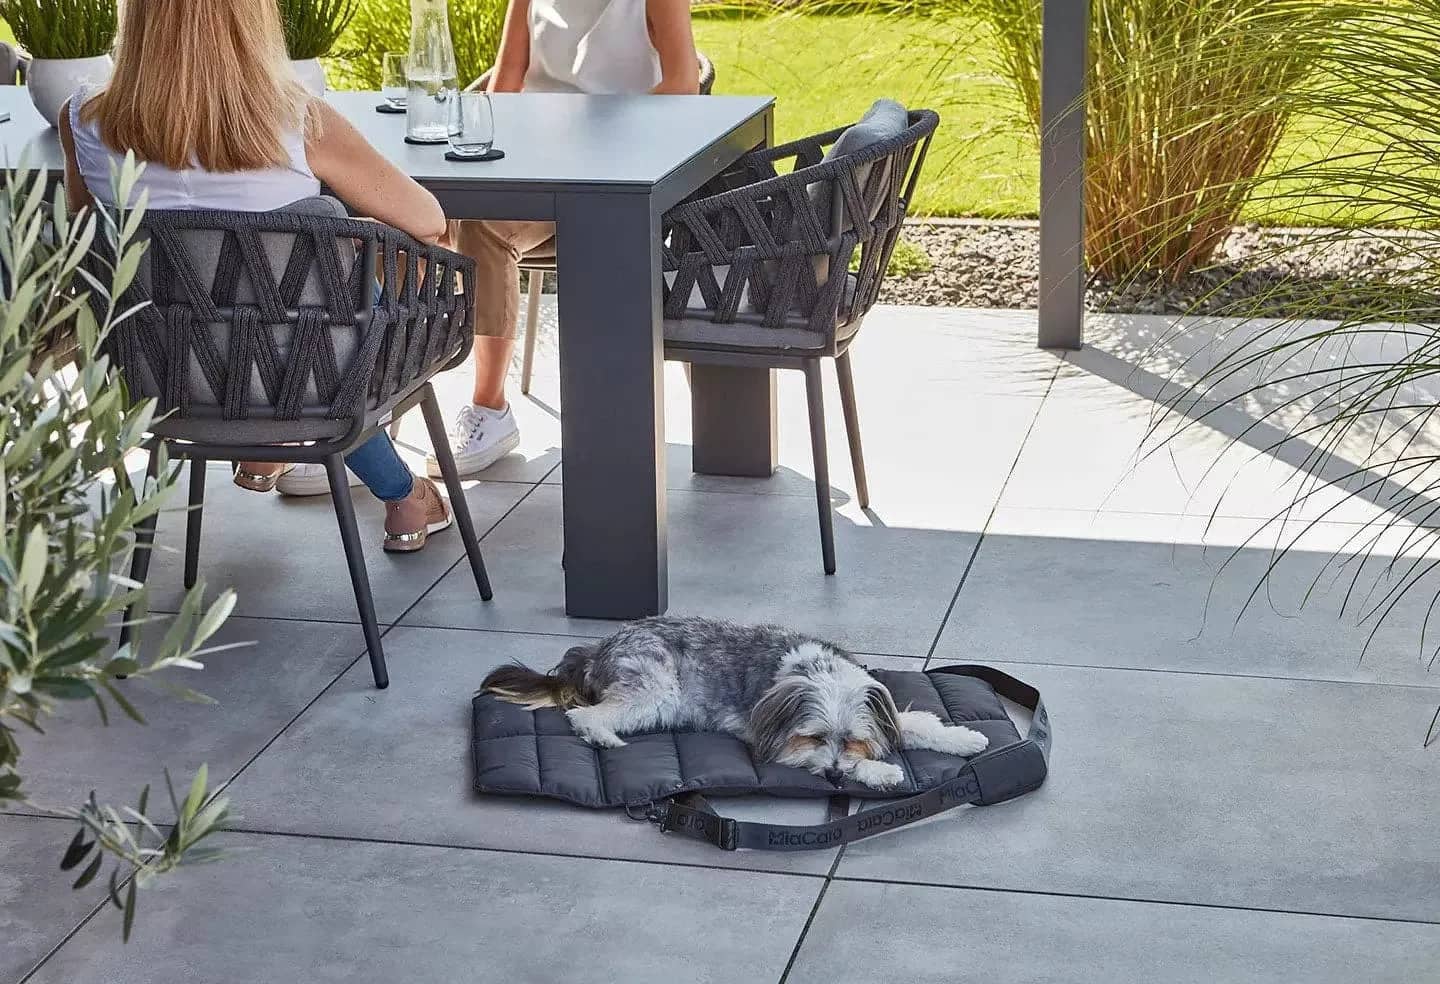 Travel with Ease Using Our Dog Travel Bed